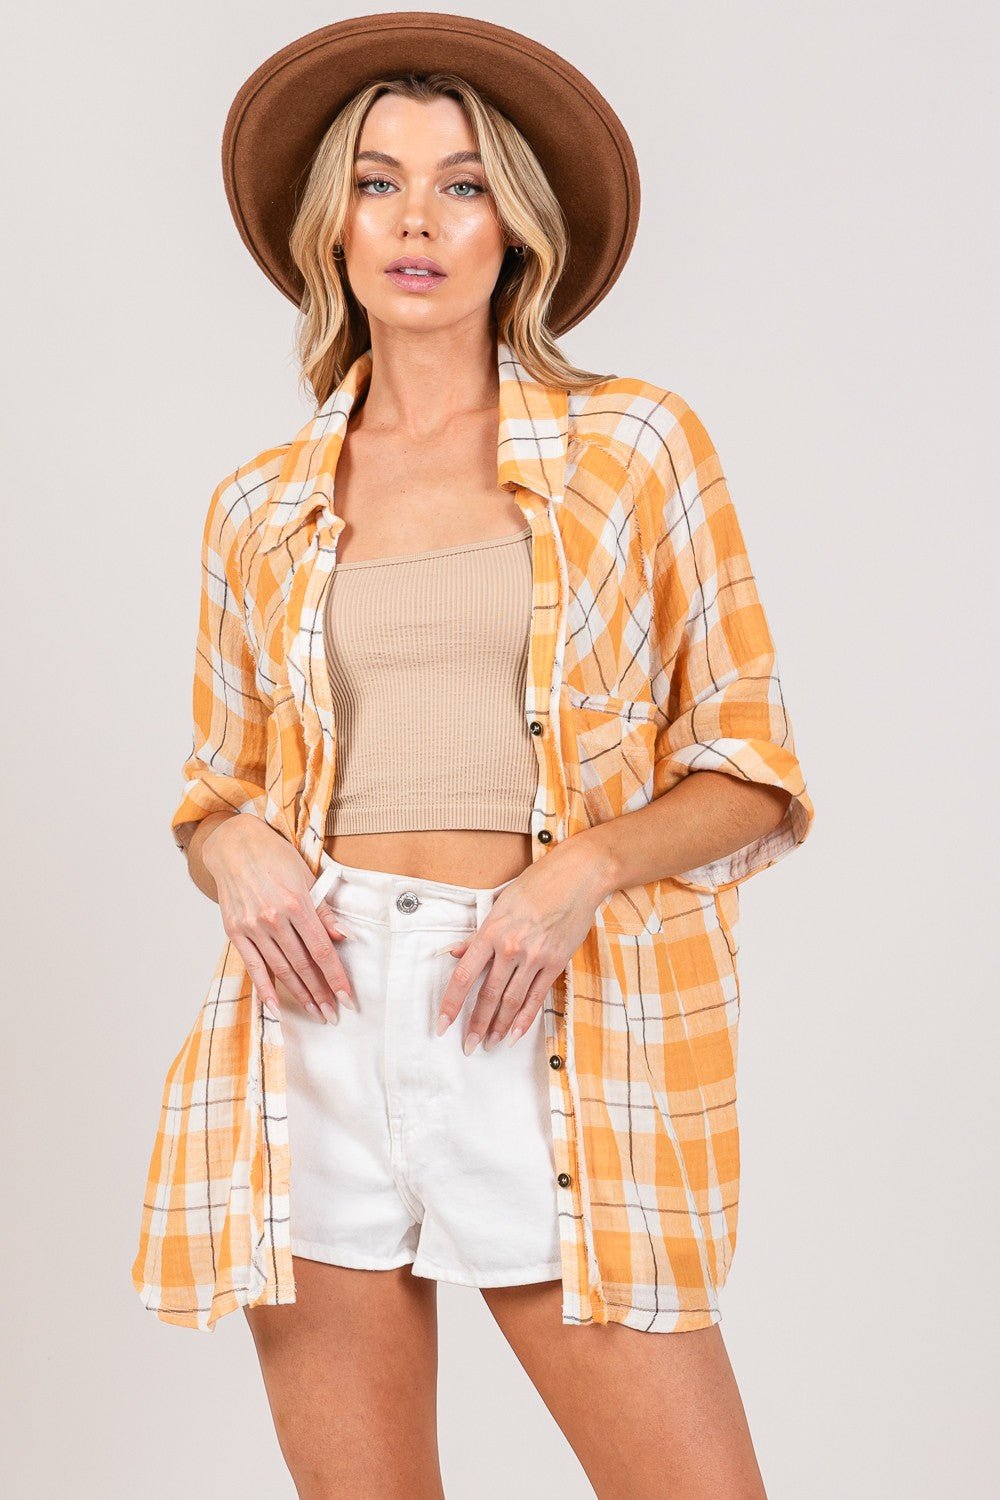 Plaid Button Up Tunic Shirt in ApricotShirtSAGE+FIG